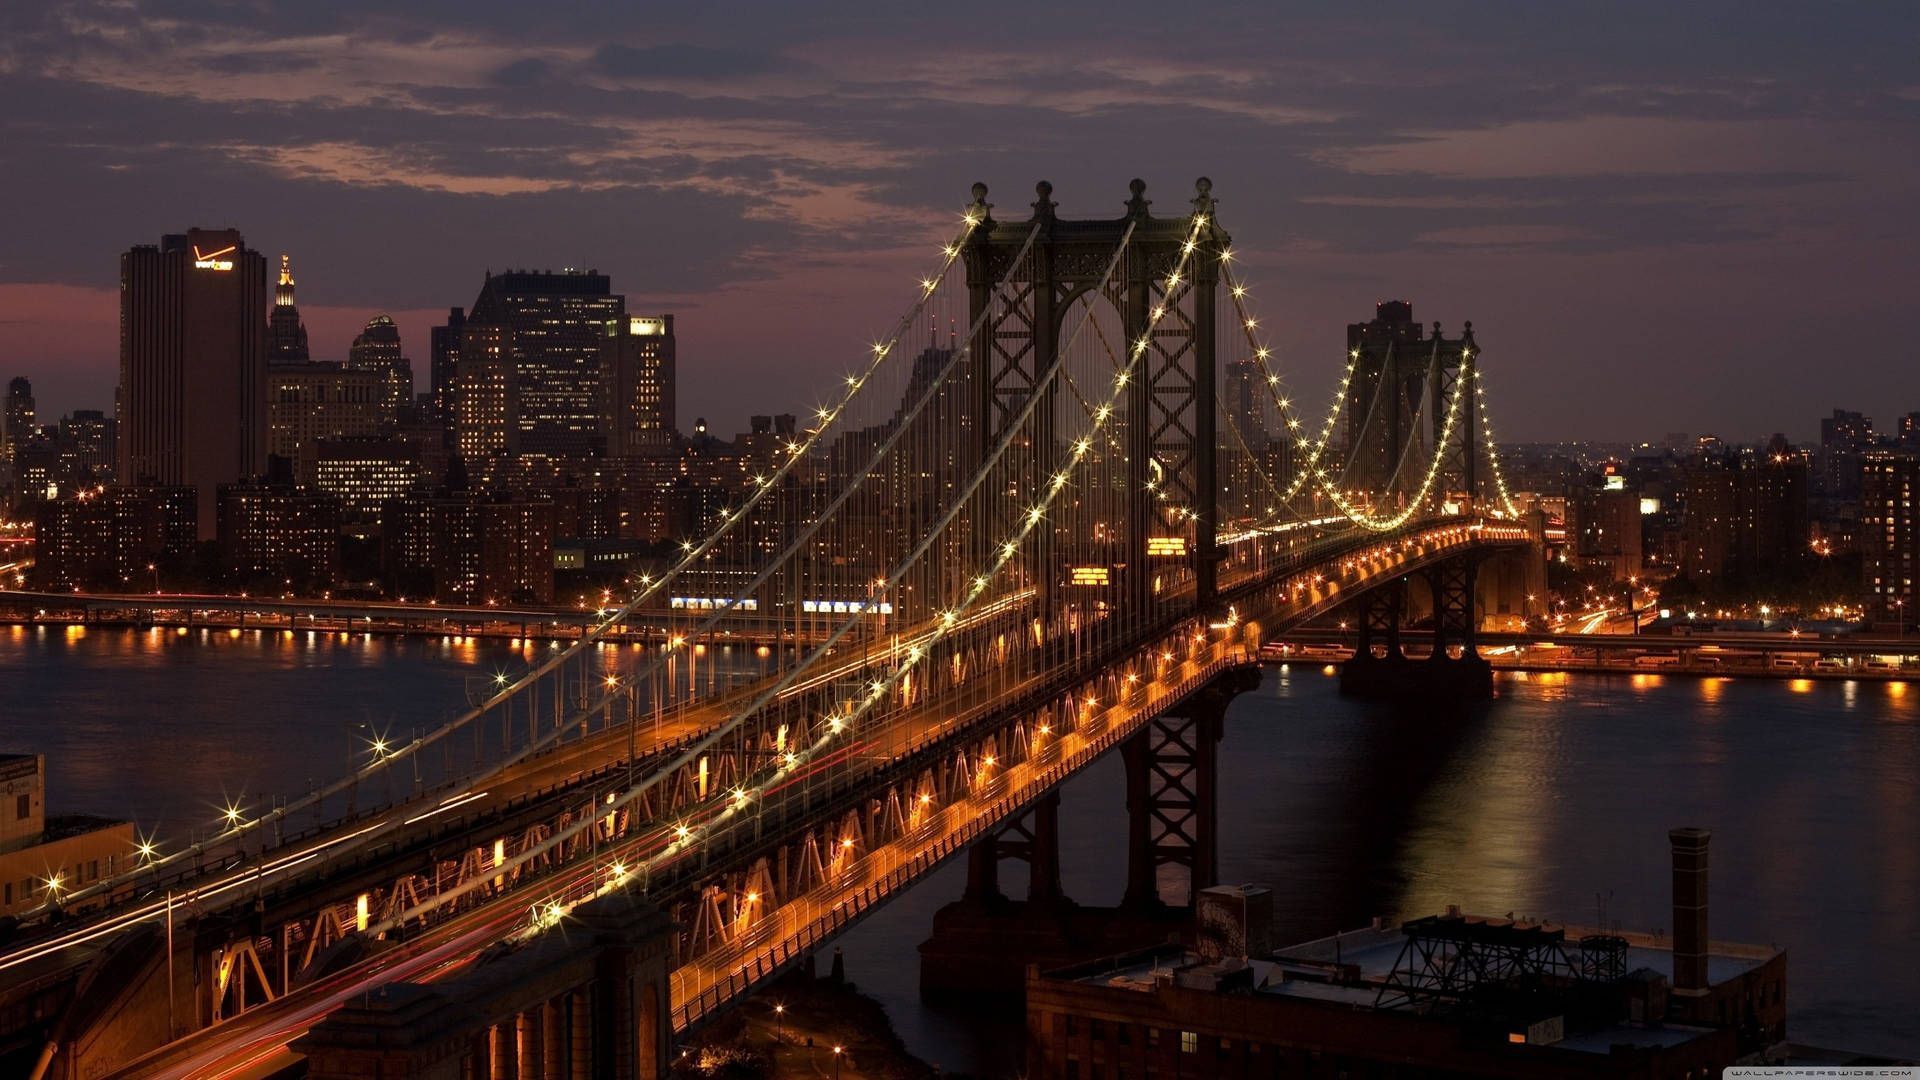 Manhattan Bridge at night, New York, USA, HD Bridges, 4k wallpapers, images, backgrounds, photos and pictures - New York